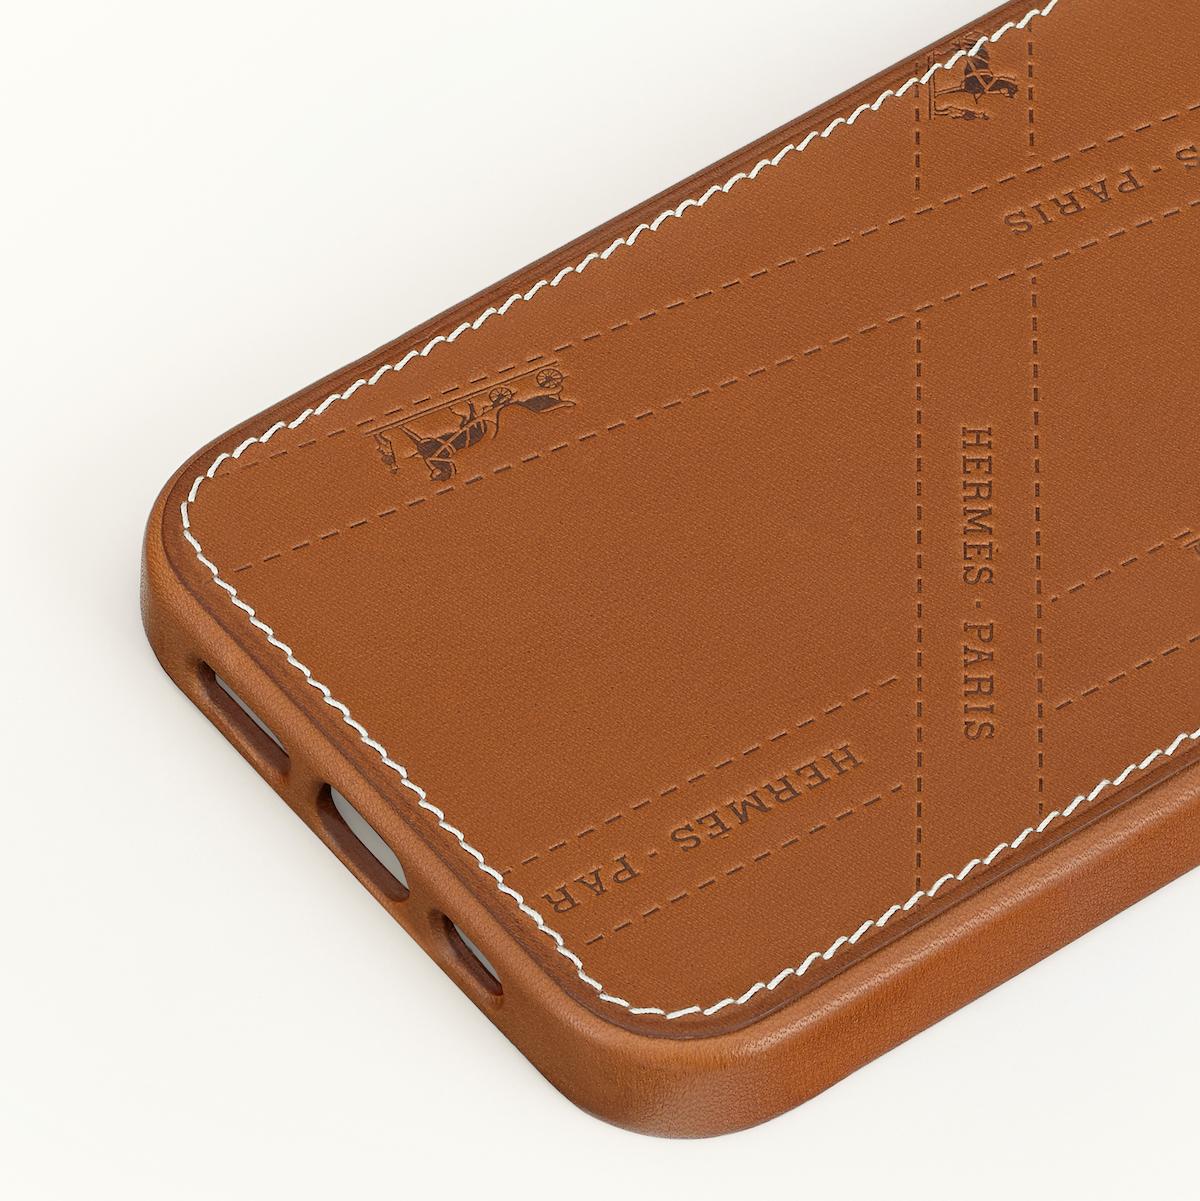 Hermes has exclusive $699 AirTag Travel Tag, $570 iPhone 12 MagSafe case